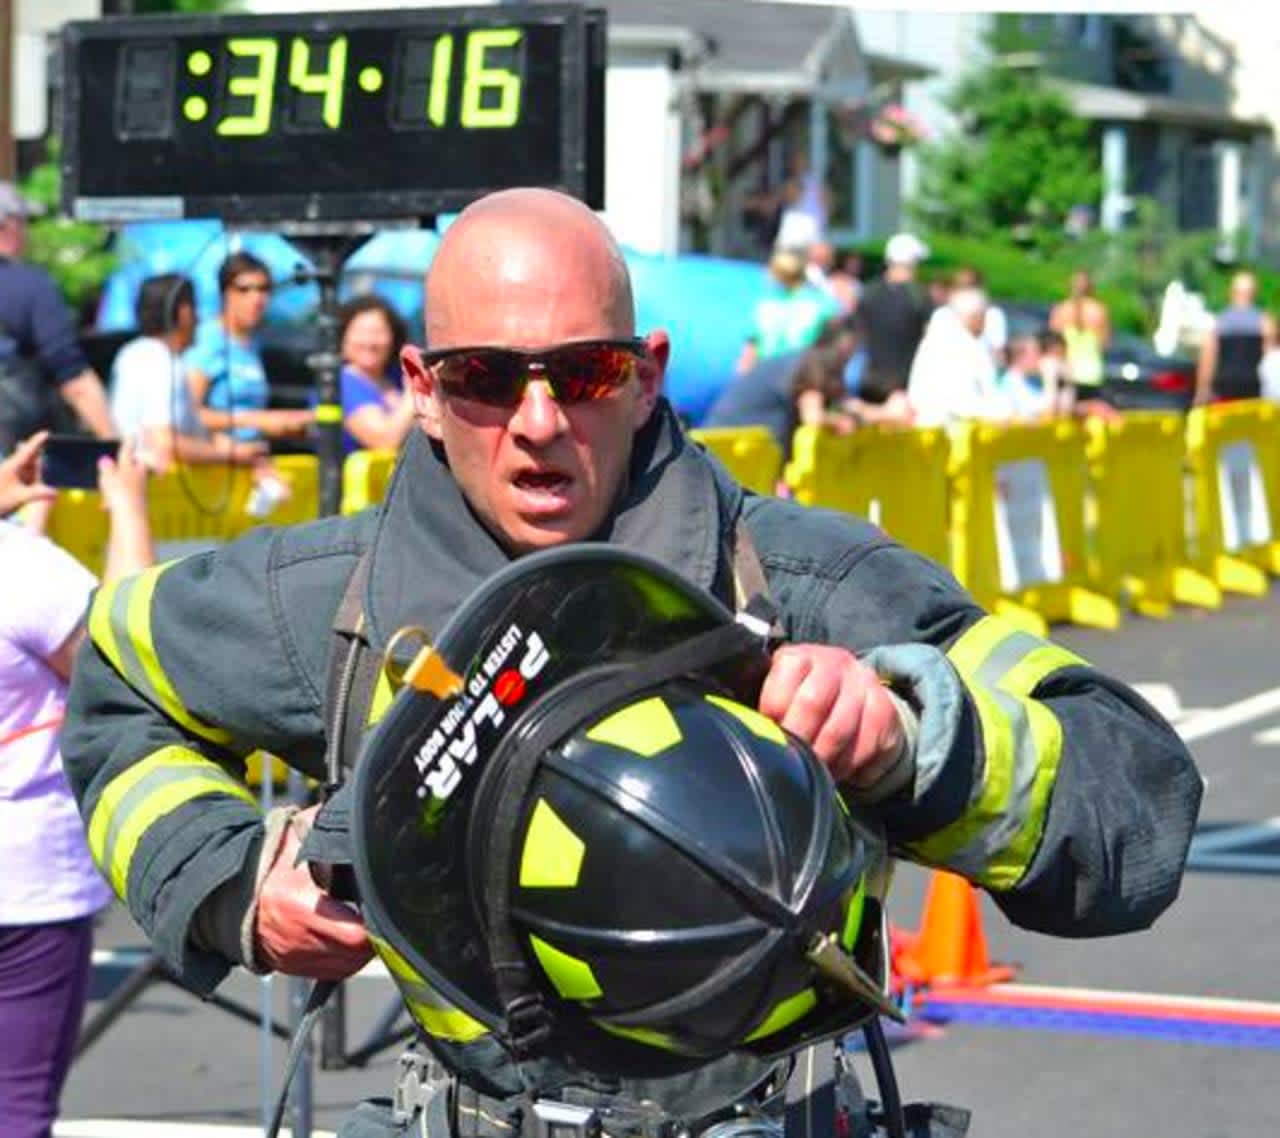 A New Milford firefighter crosses the finish line at a previous 5K Run.